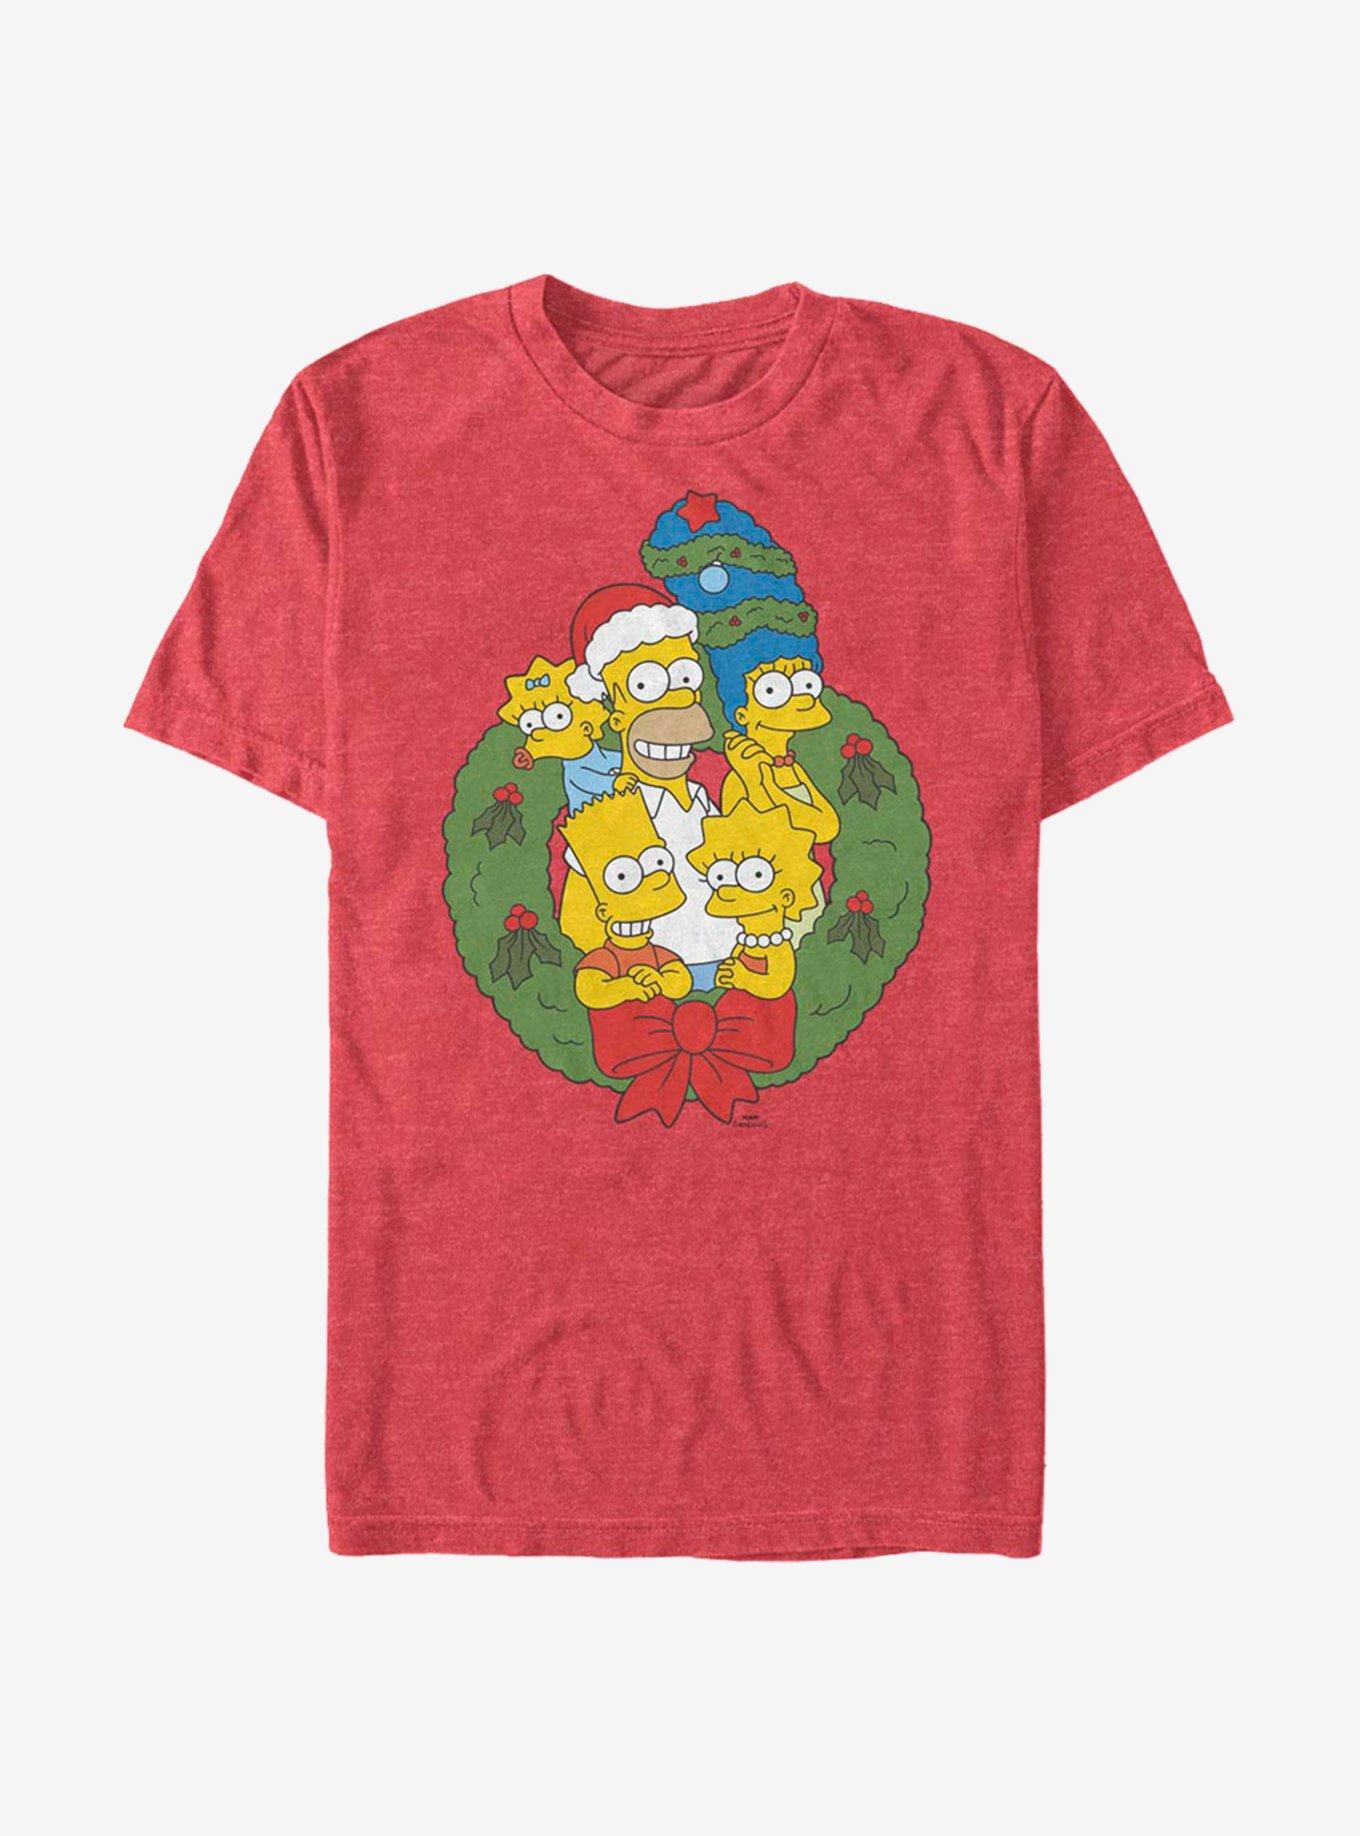 The Simpsons Family | Hot Topic Wreath RED Holiday T-Shirt 